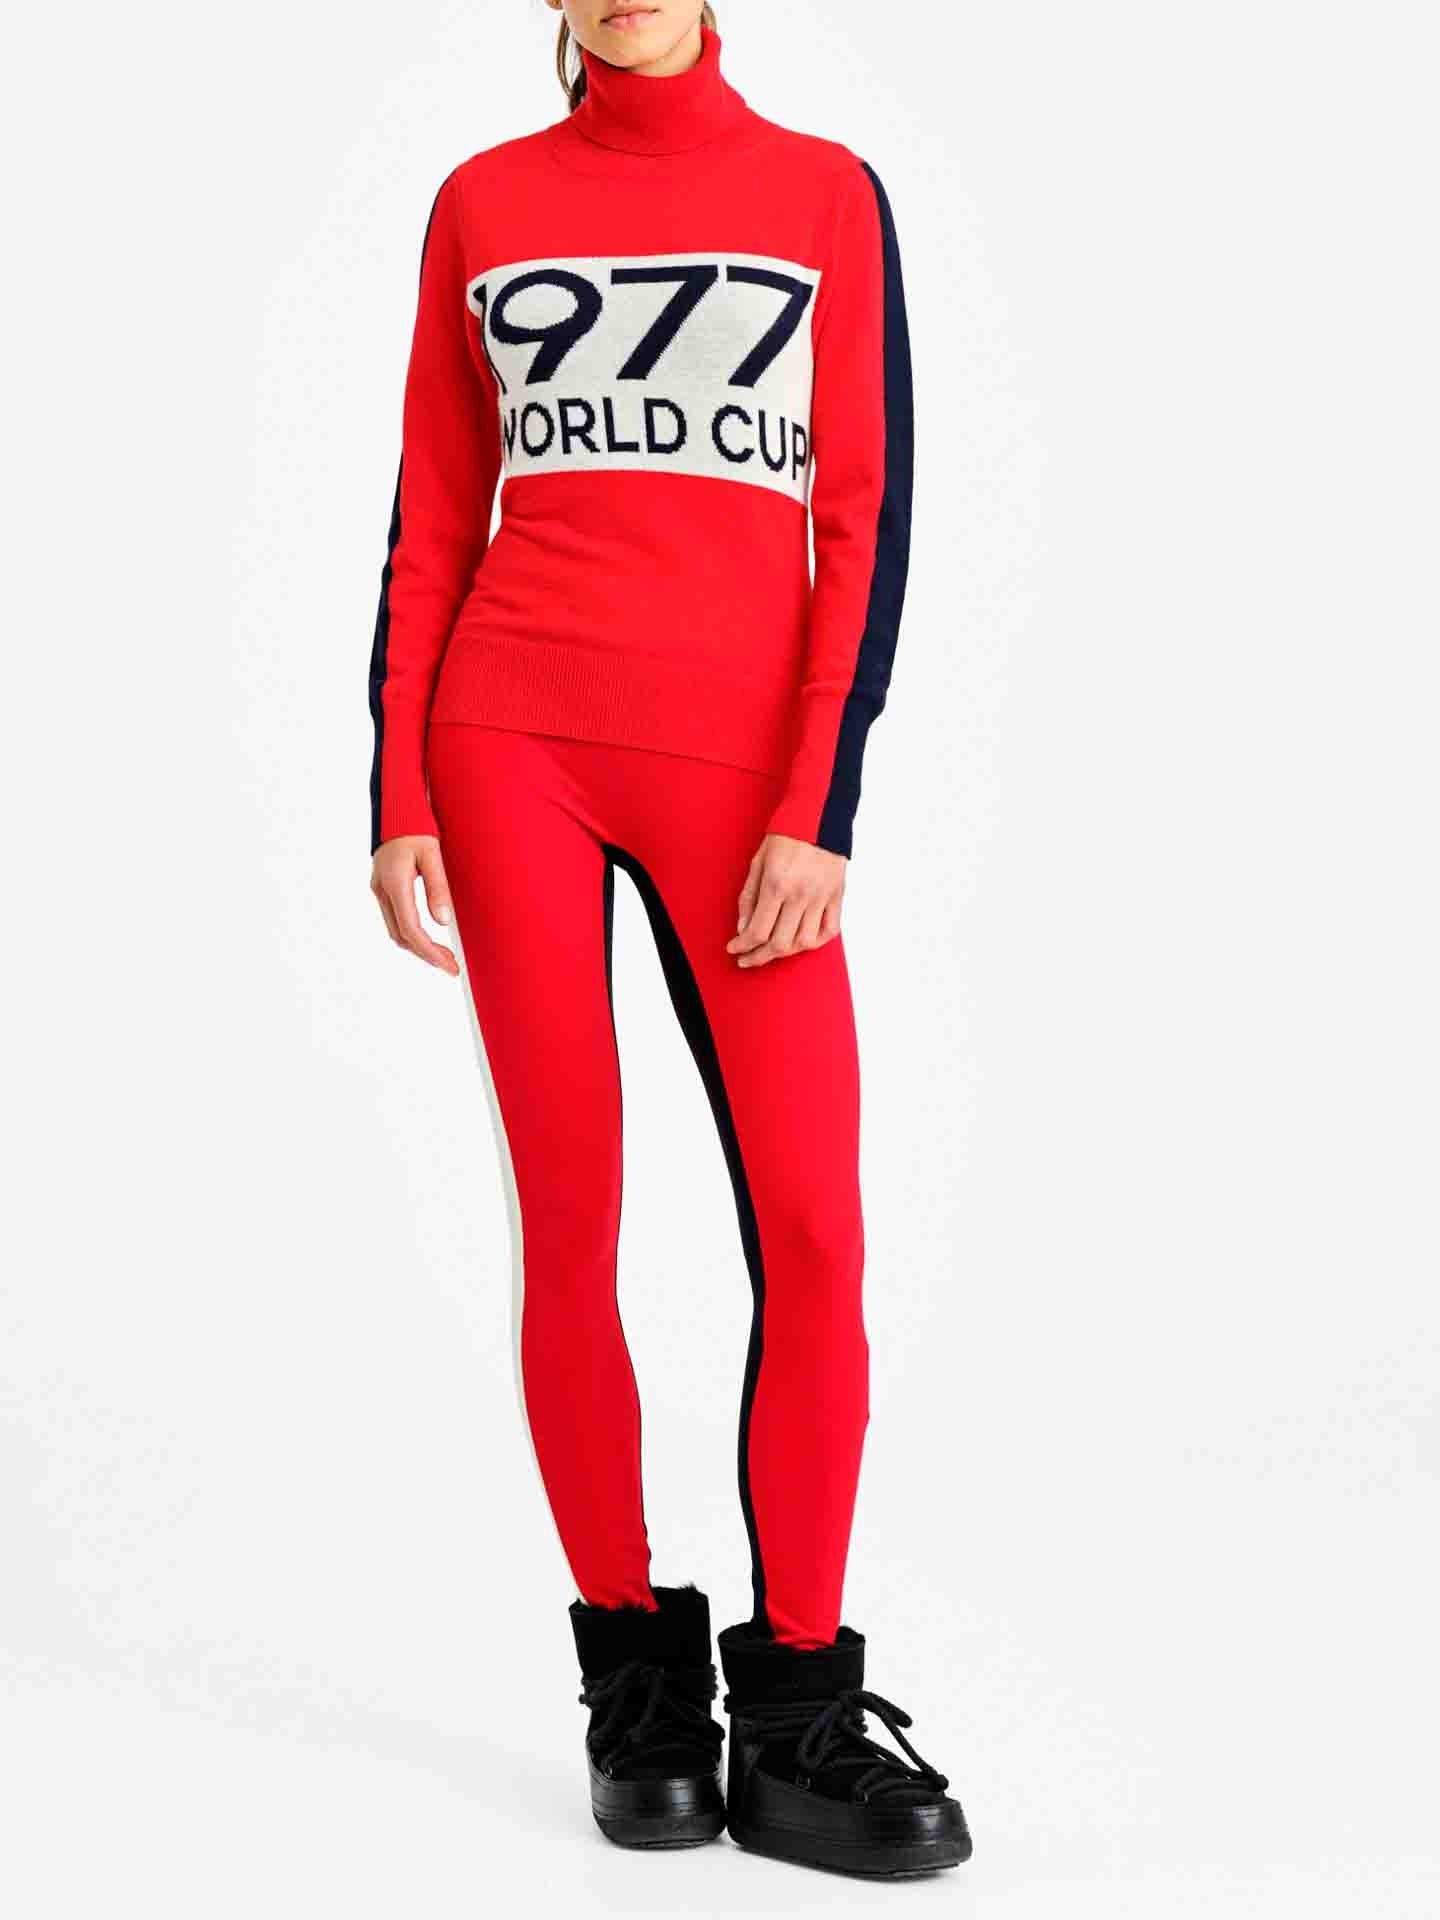 1977 World Cup Sweater Women Red